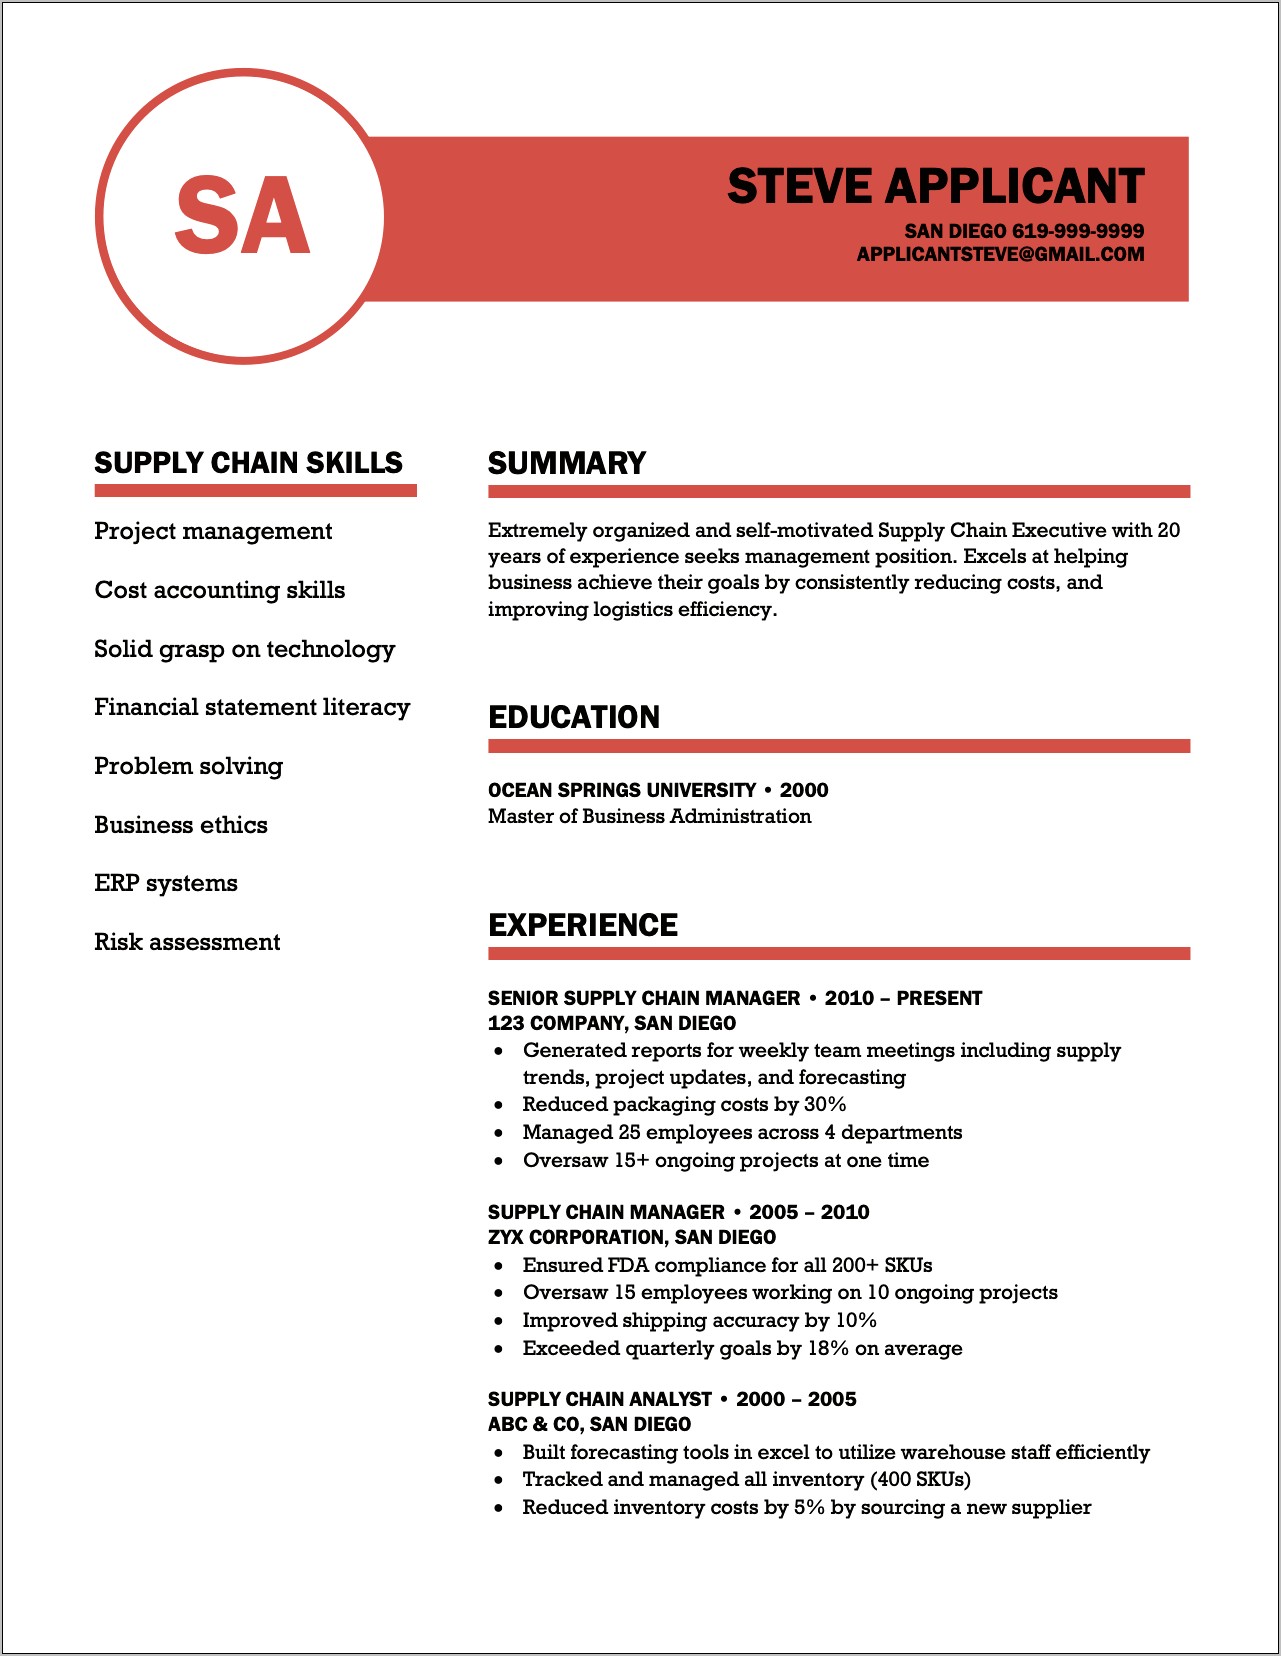 Sample Resume Of Logistics Supply Chain Manager